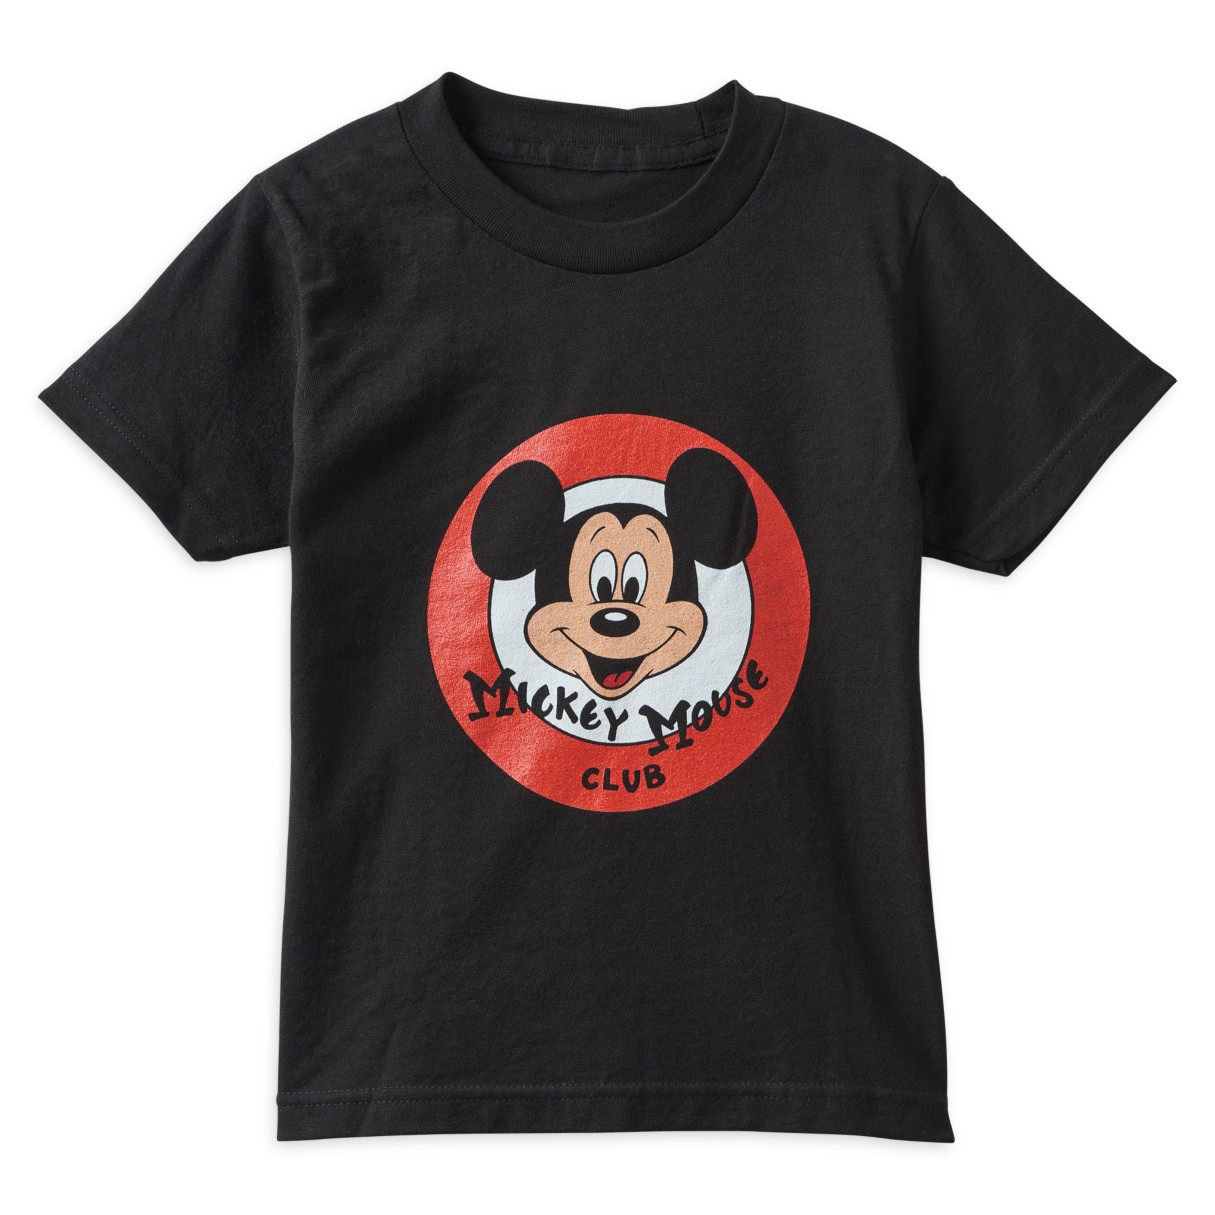 The Mickey Mouse Club Logo T-Shirt for Kids